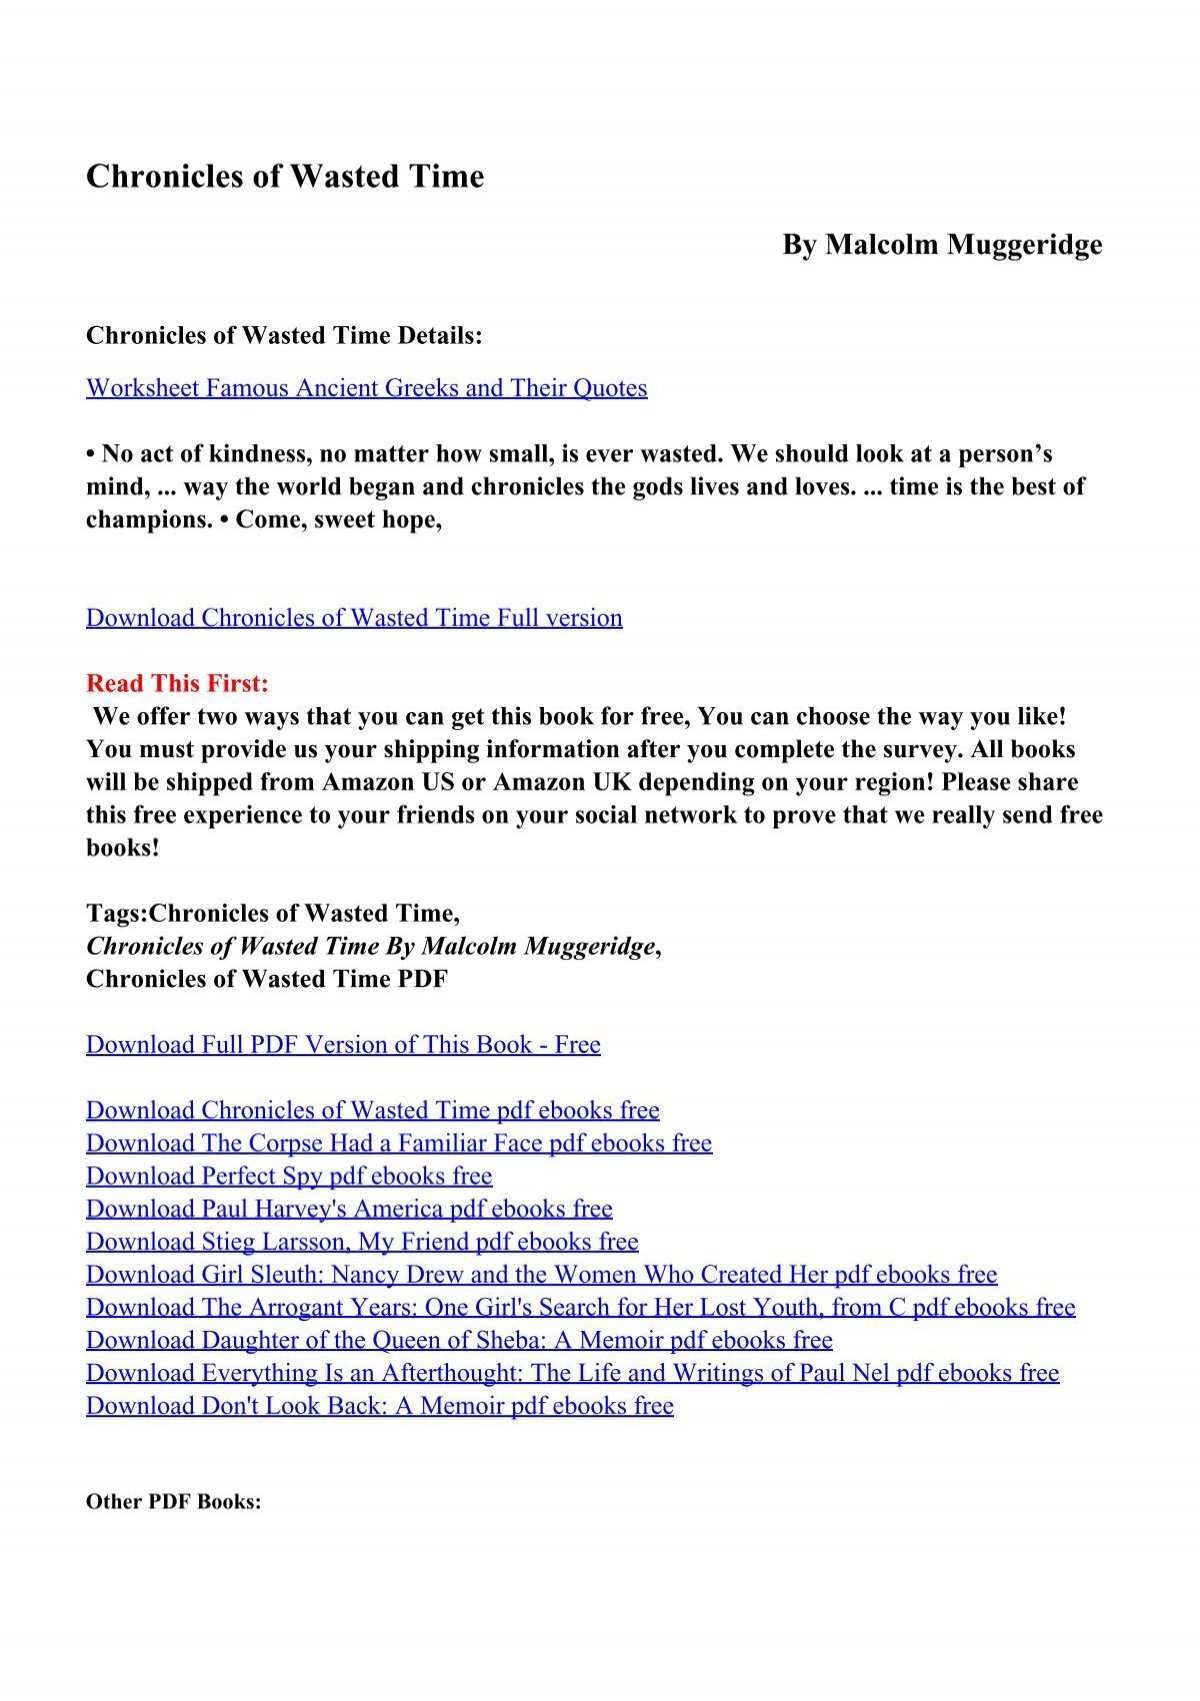 Download Chronicles Of Wasted Time Pdf Ebooks By Malcolm